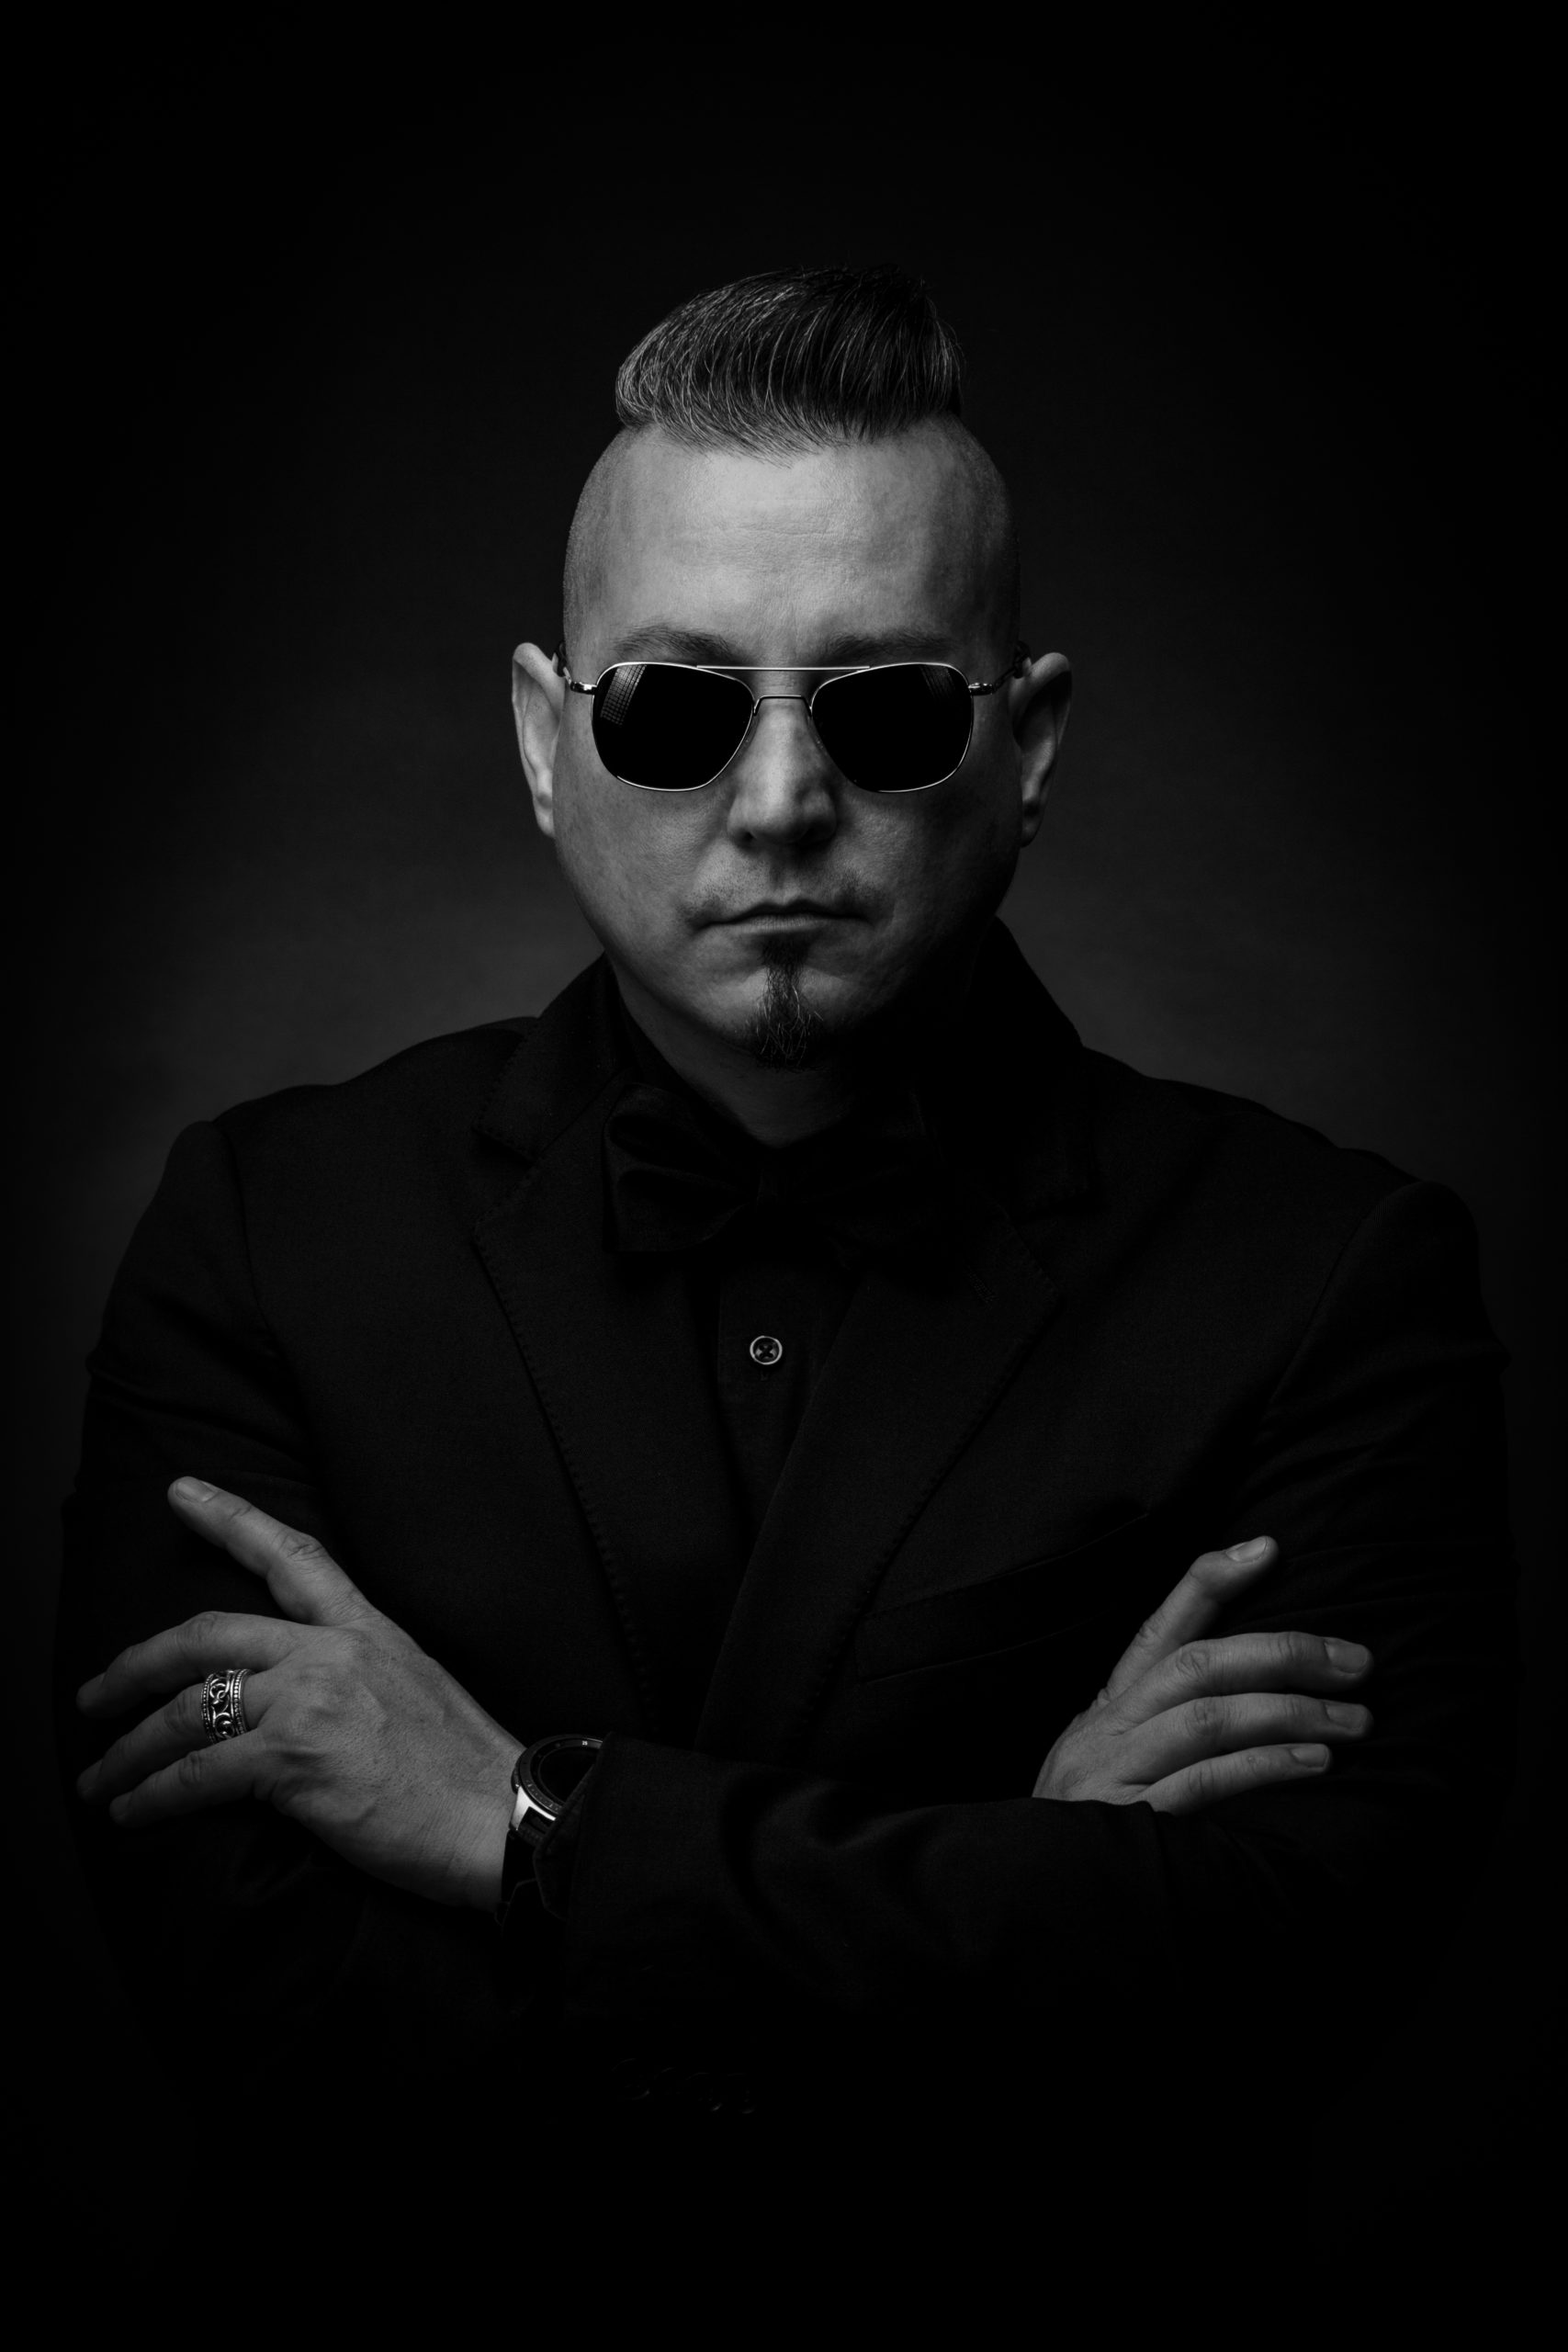 A black and white photo of a man in a suit and sunglasses captured by Chris Spicks Photography.